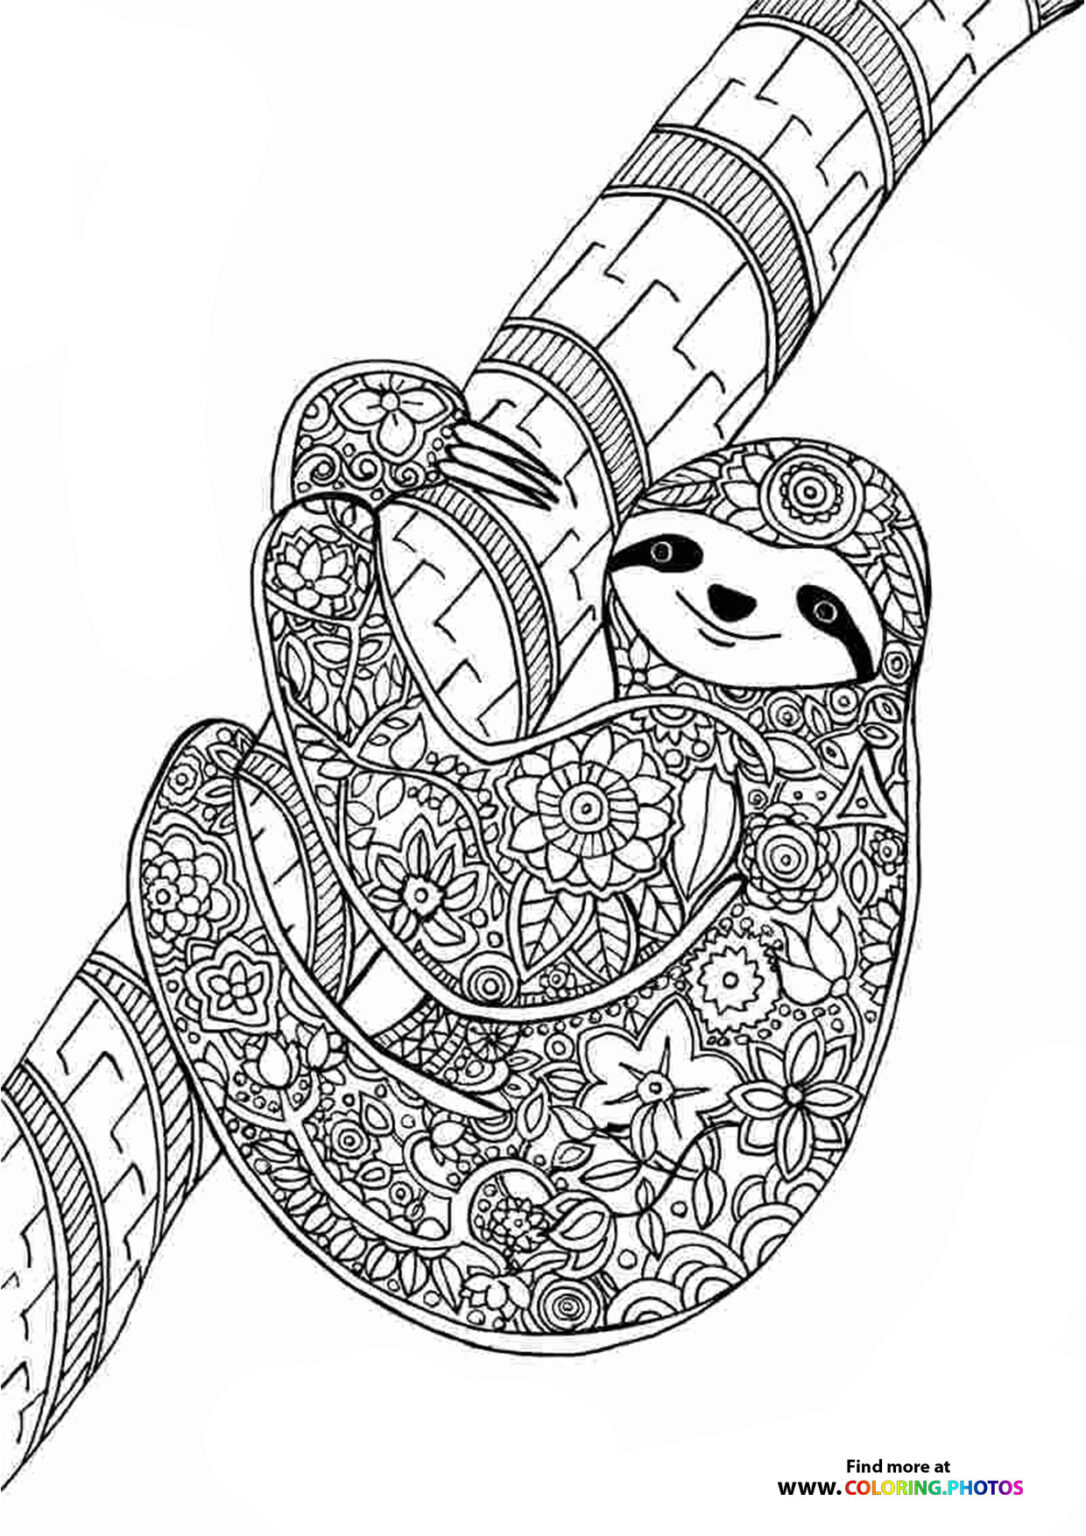 Sloth coloring page for adults - Coloring Pages for kids